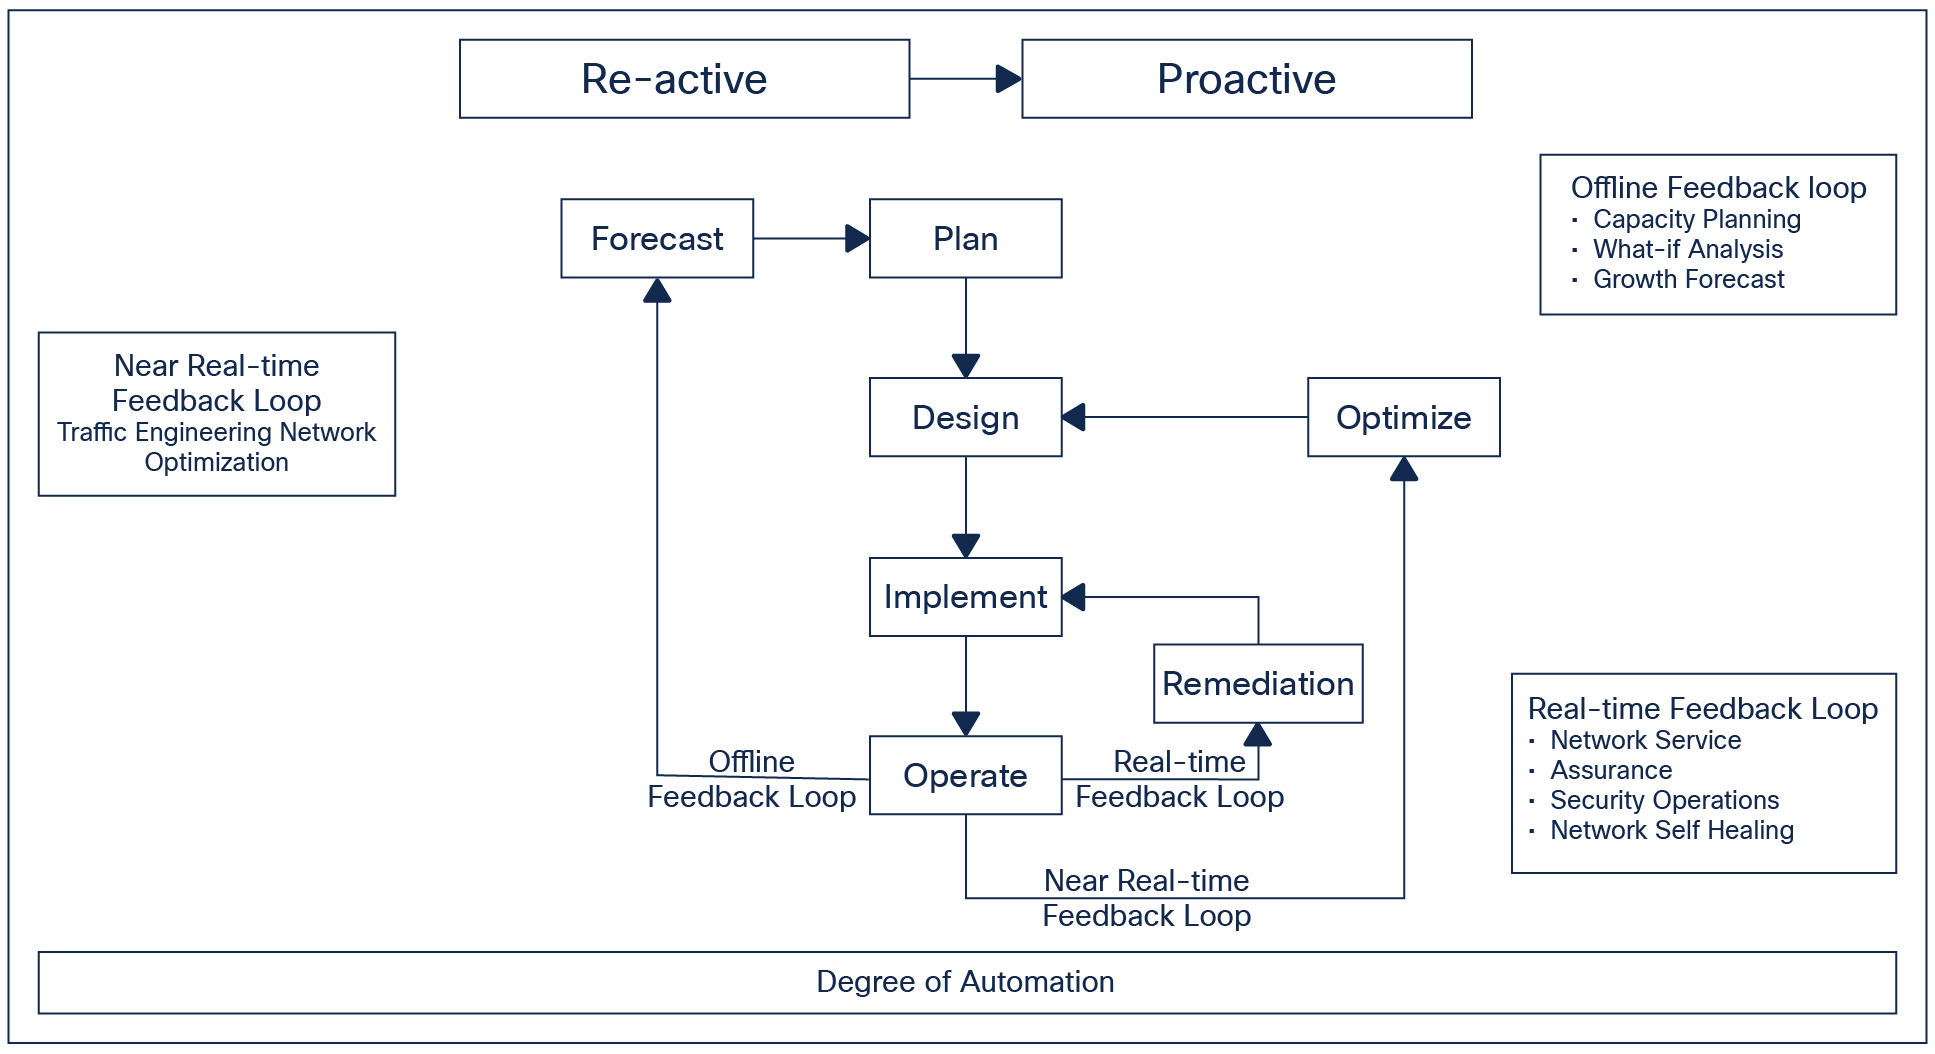 Figure of network development lifecycle with related actions for each phase